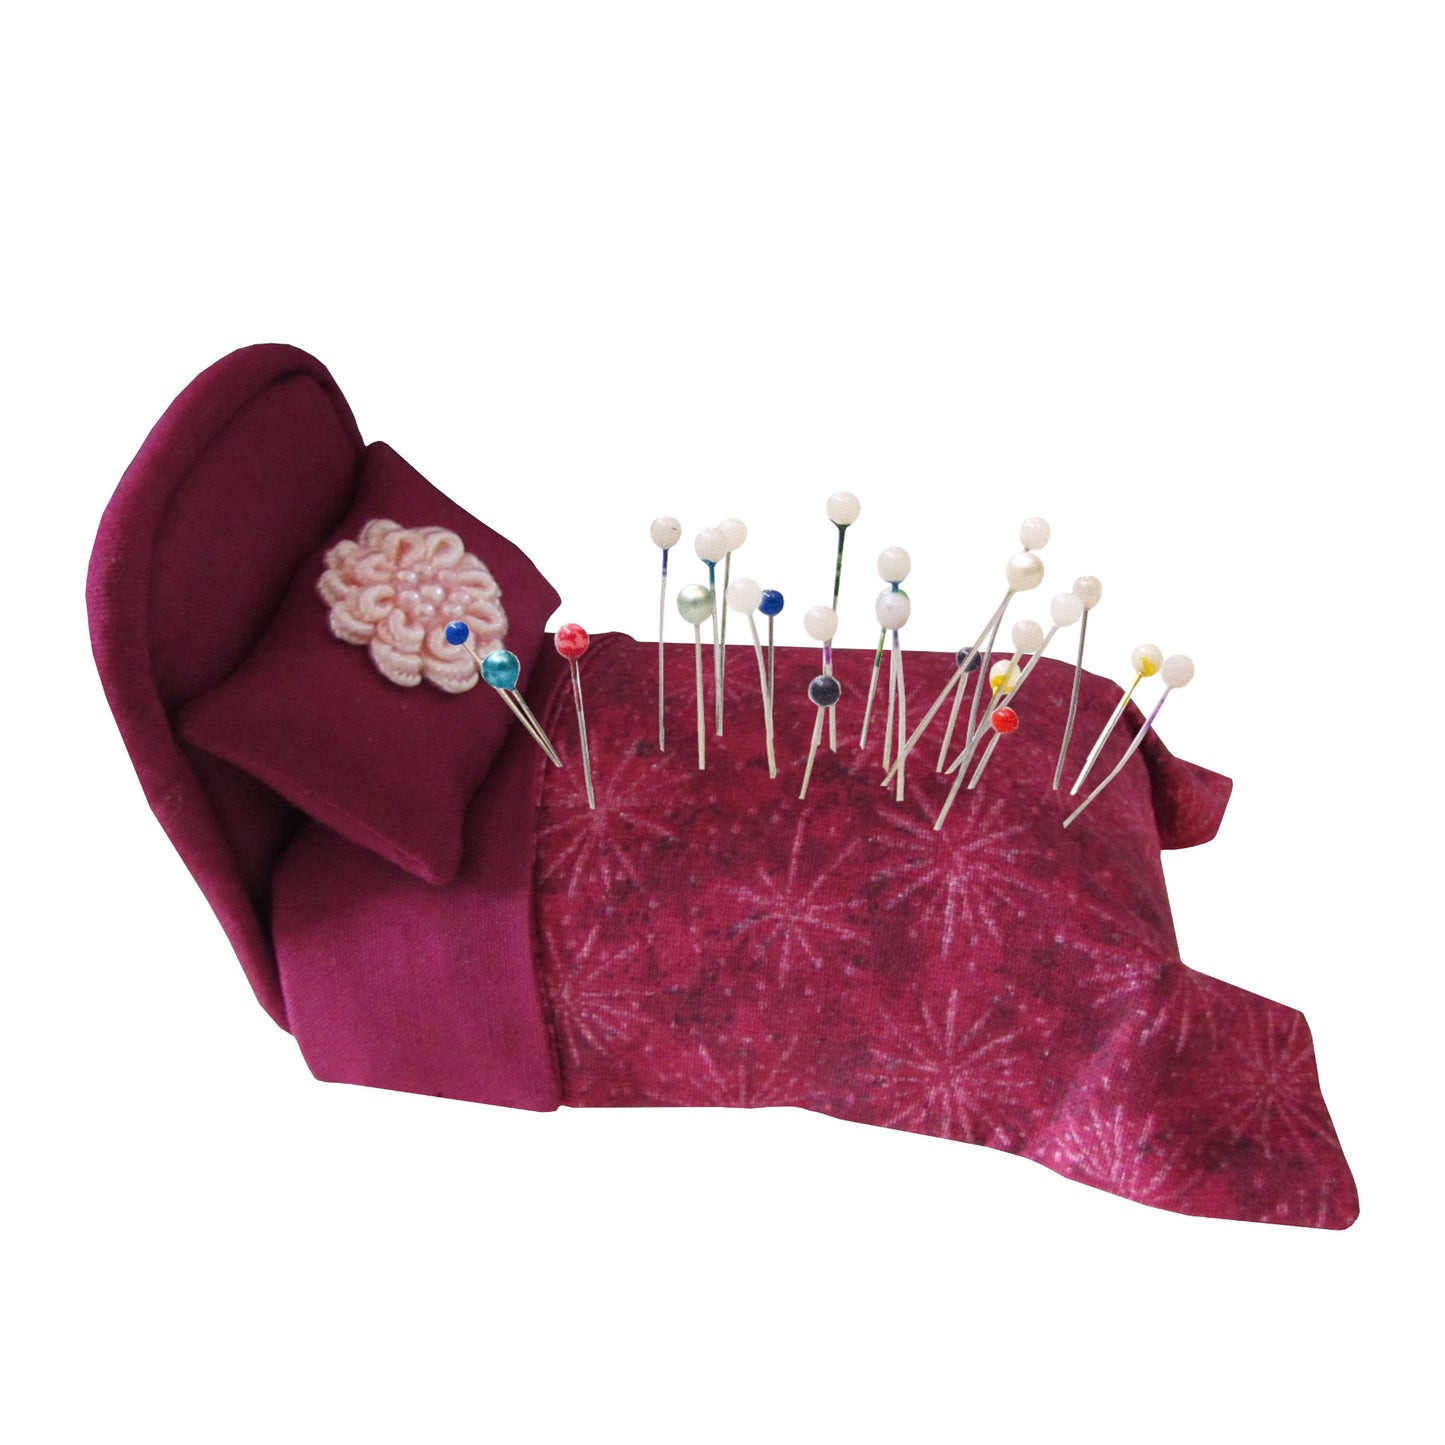 Burgundy Pincushion Bed with Bedding Side view with pins